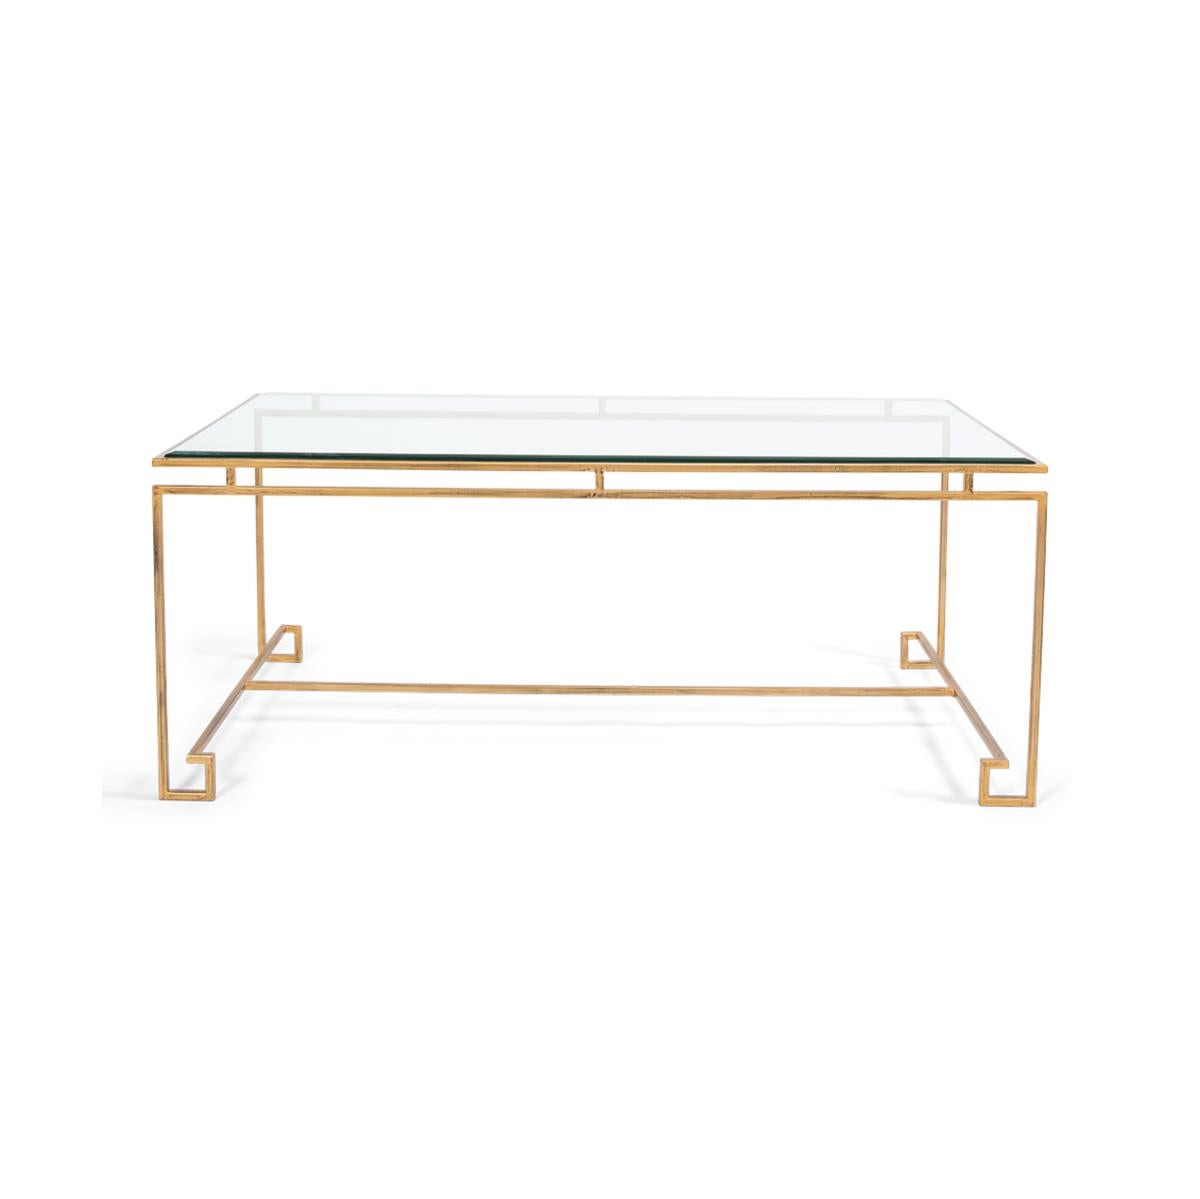 A rectangular tempered glass top cocktail table with an antique gold finish iron base with Greek key form feet.

Dimensions: 48